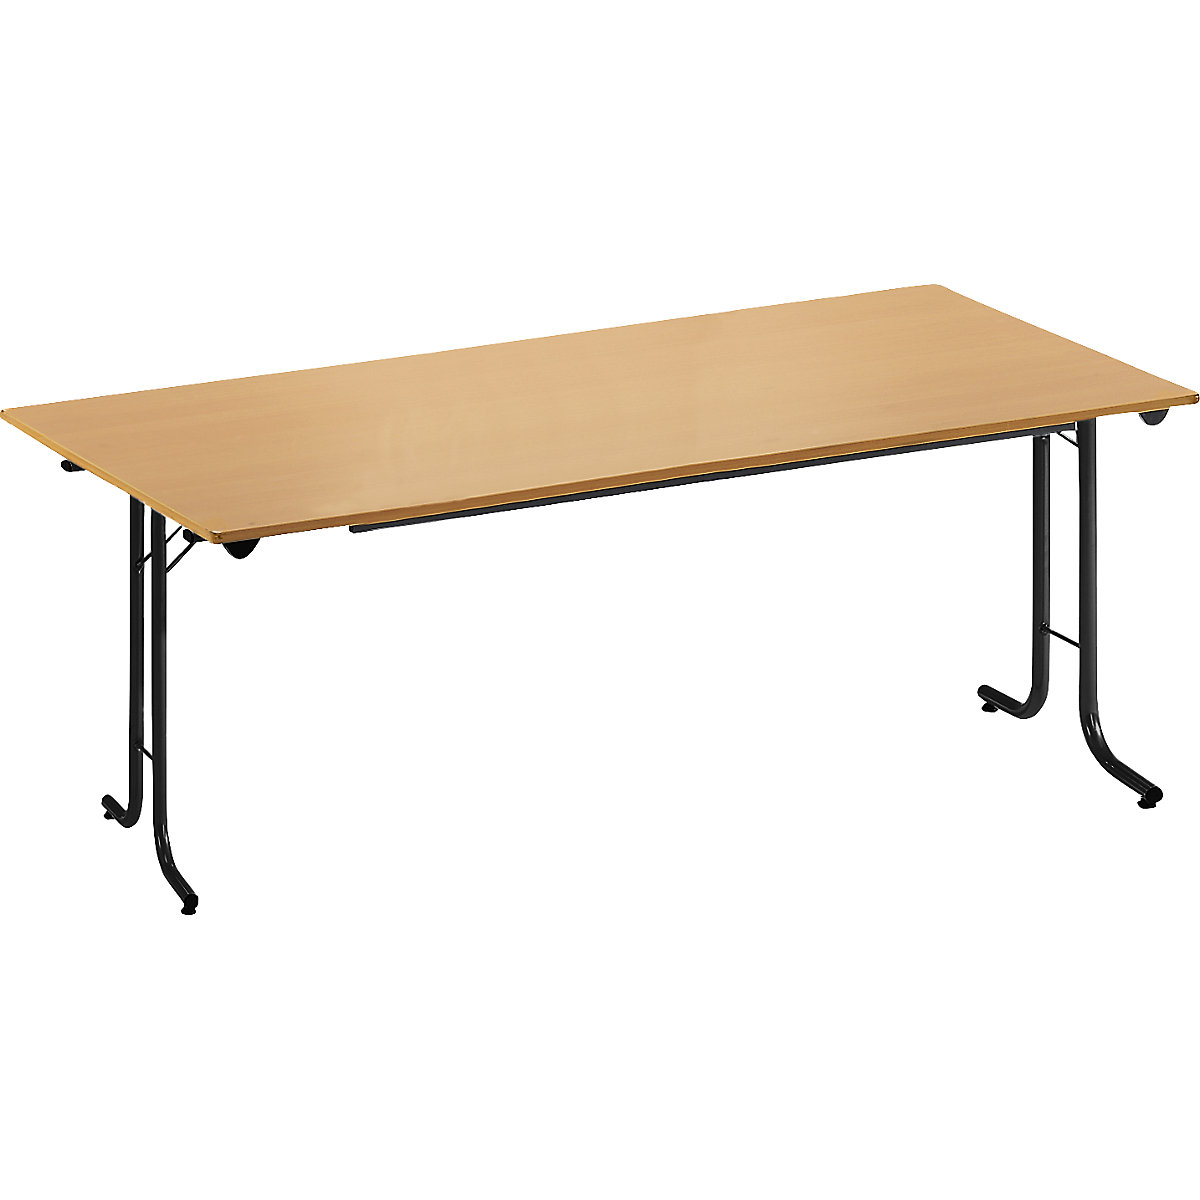 Folding table, with rounded edges, round tubular frame, rectangular top, 1600 x 700 mm, black frame, beech finish tabletop-10